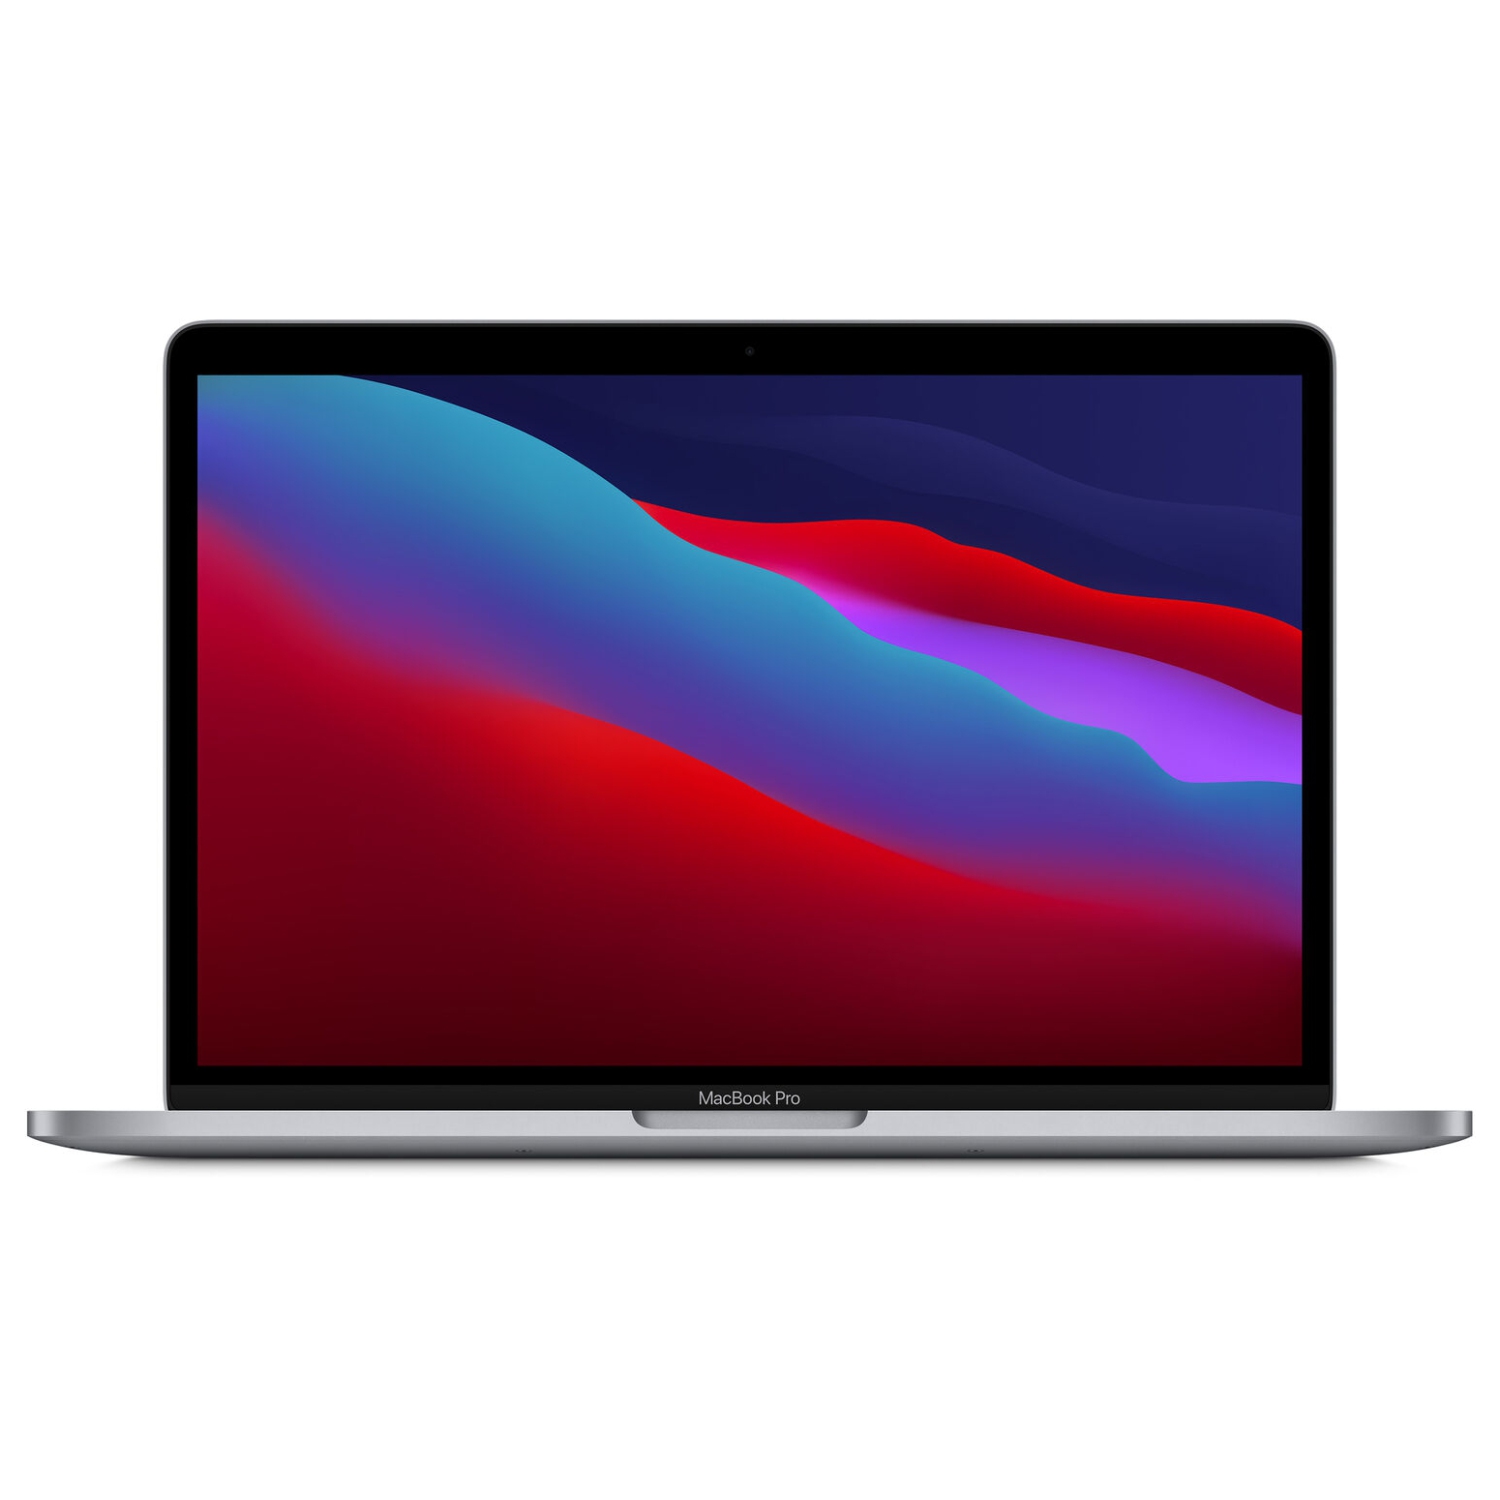 Refurbished (Excellent) - Apple MacBook Pro 13.3" w/ Touch Bar (2020) - Space Grey (Apple M1 Chip/256GB SSD/8GB RAM) - Certified Refurbished